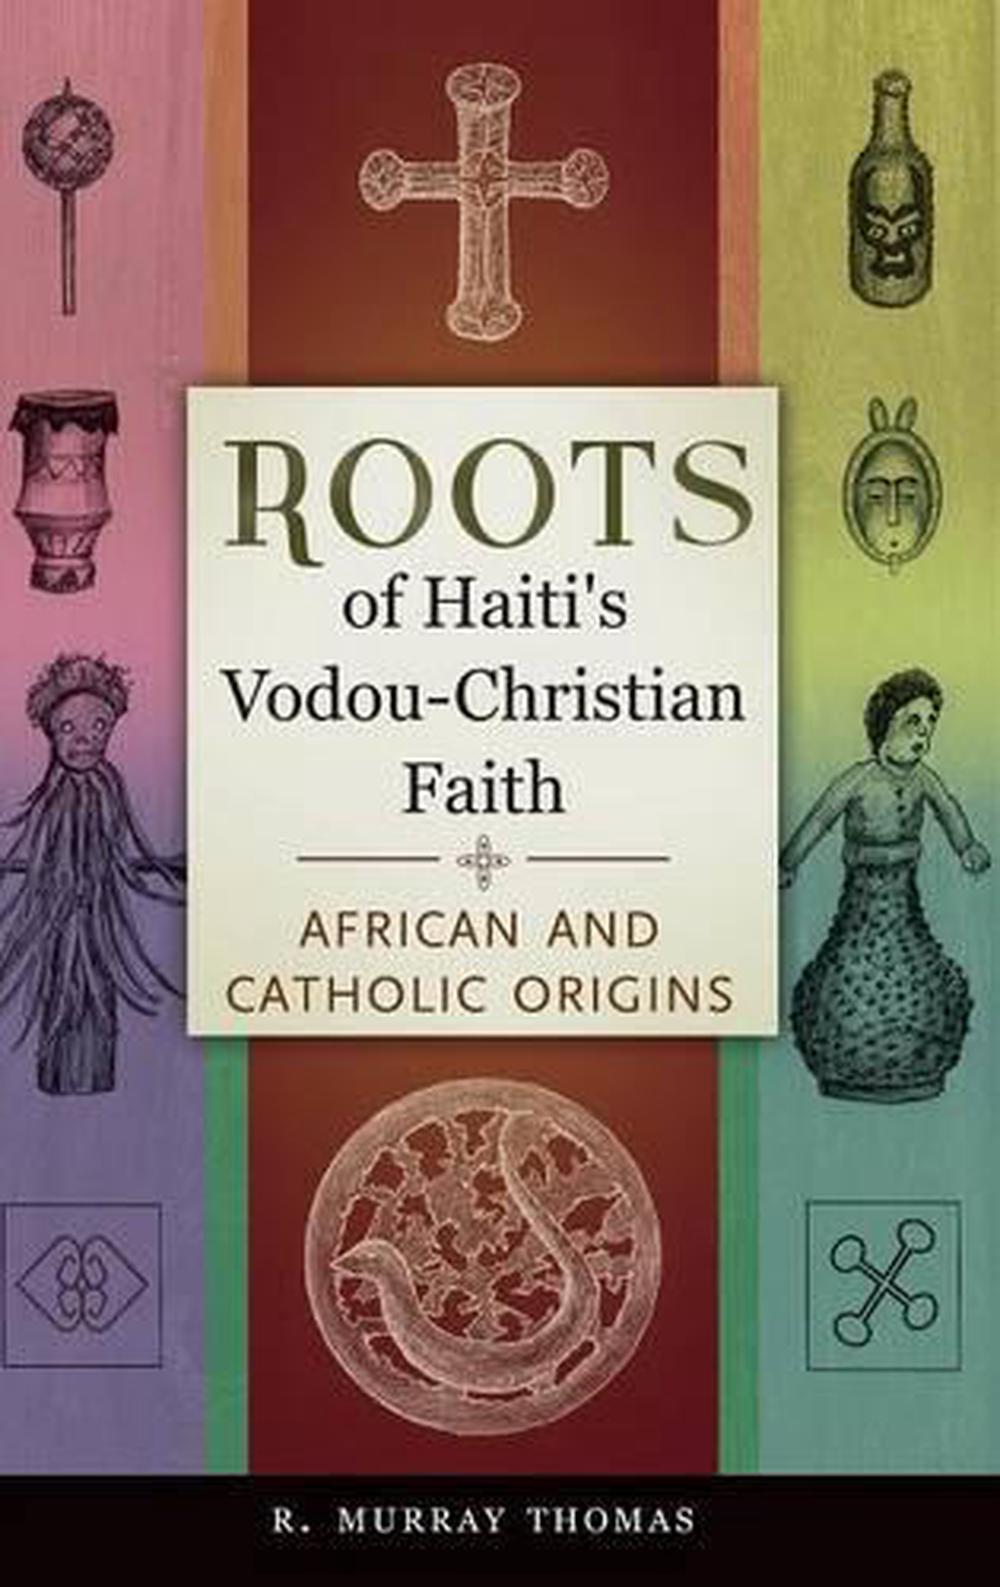 Roots of Haiti's VodouChristian Faith African and Catholic Origins by R. Murra 9781440832031